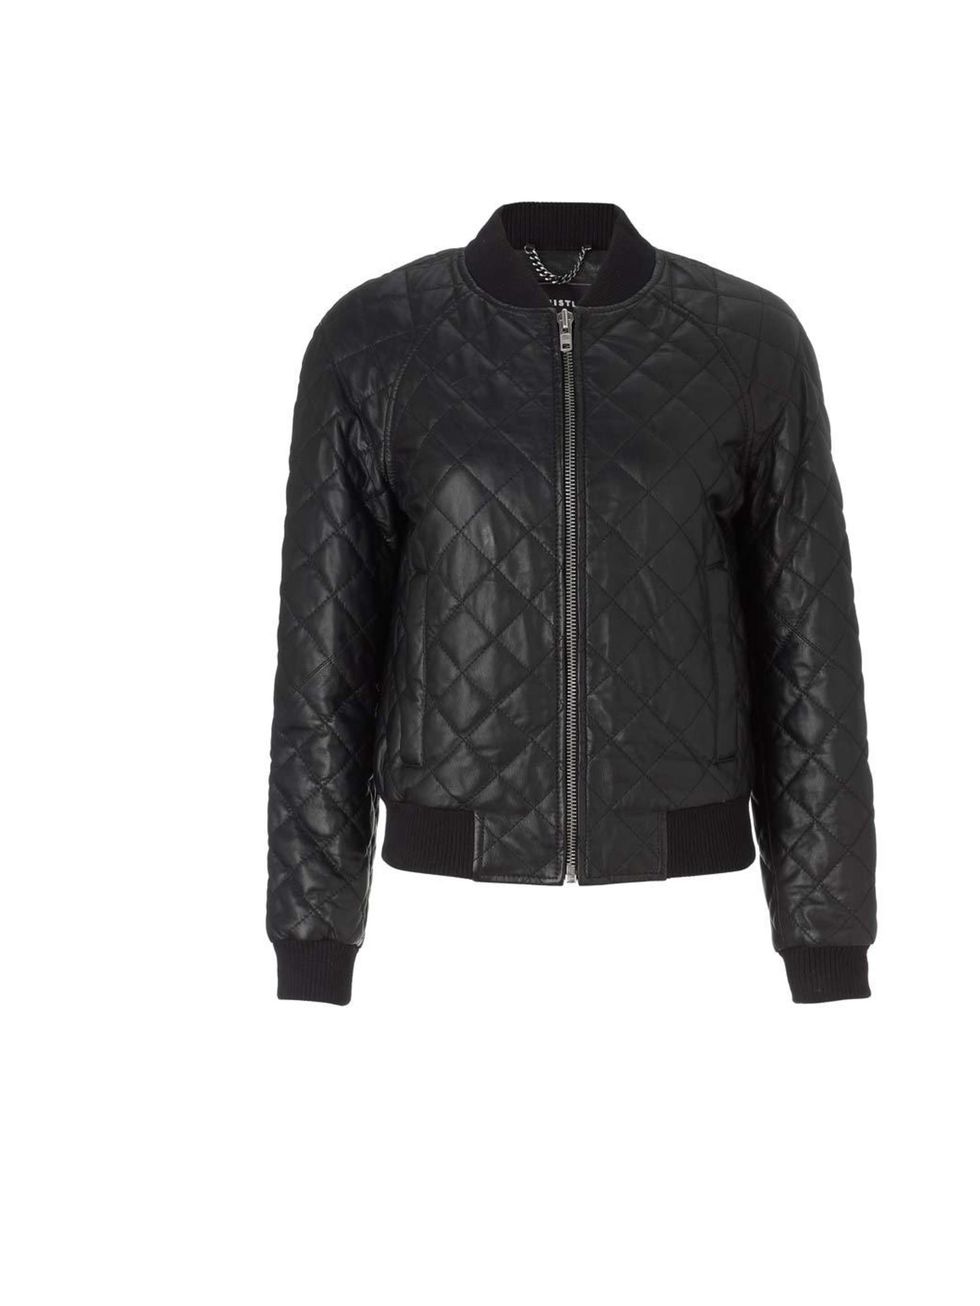 <p><a href="http://www.whistles.co.uk/fcp/categorylist/dept/shop?resetFilters=true">Whistles </a>leather bomber jacket £350 </p>